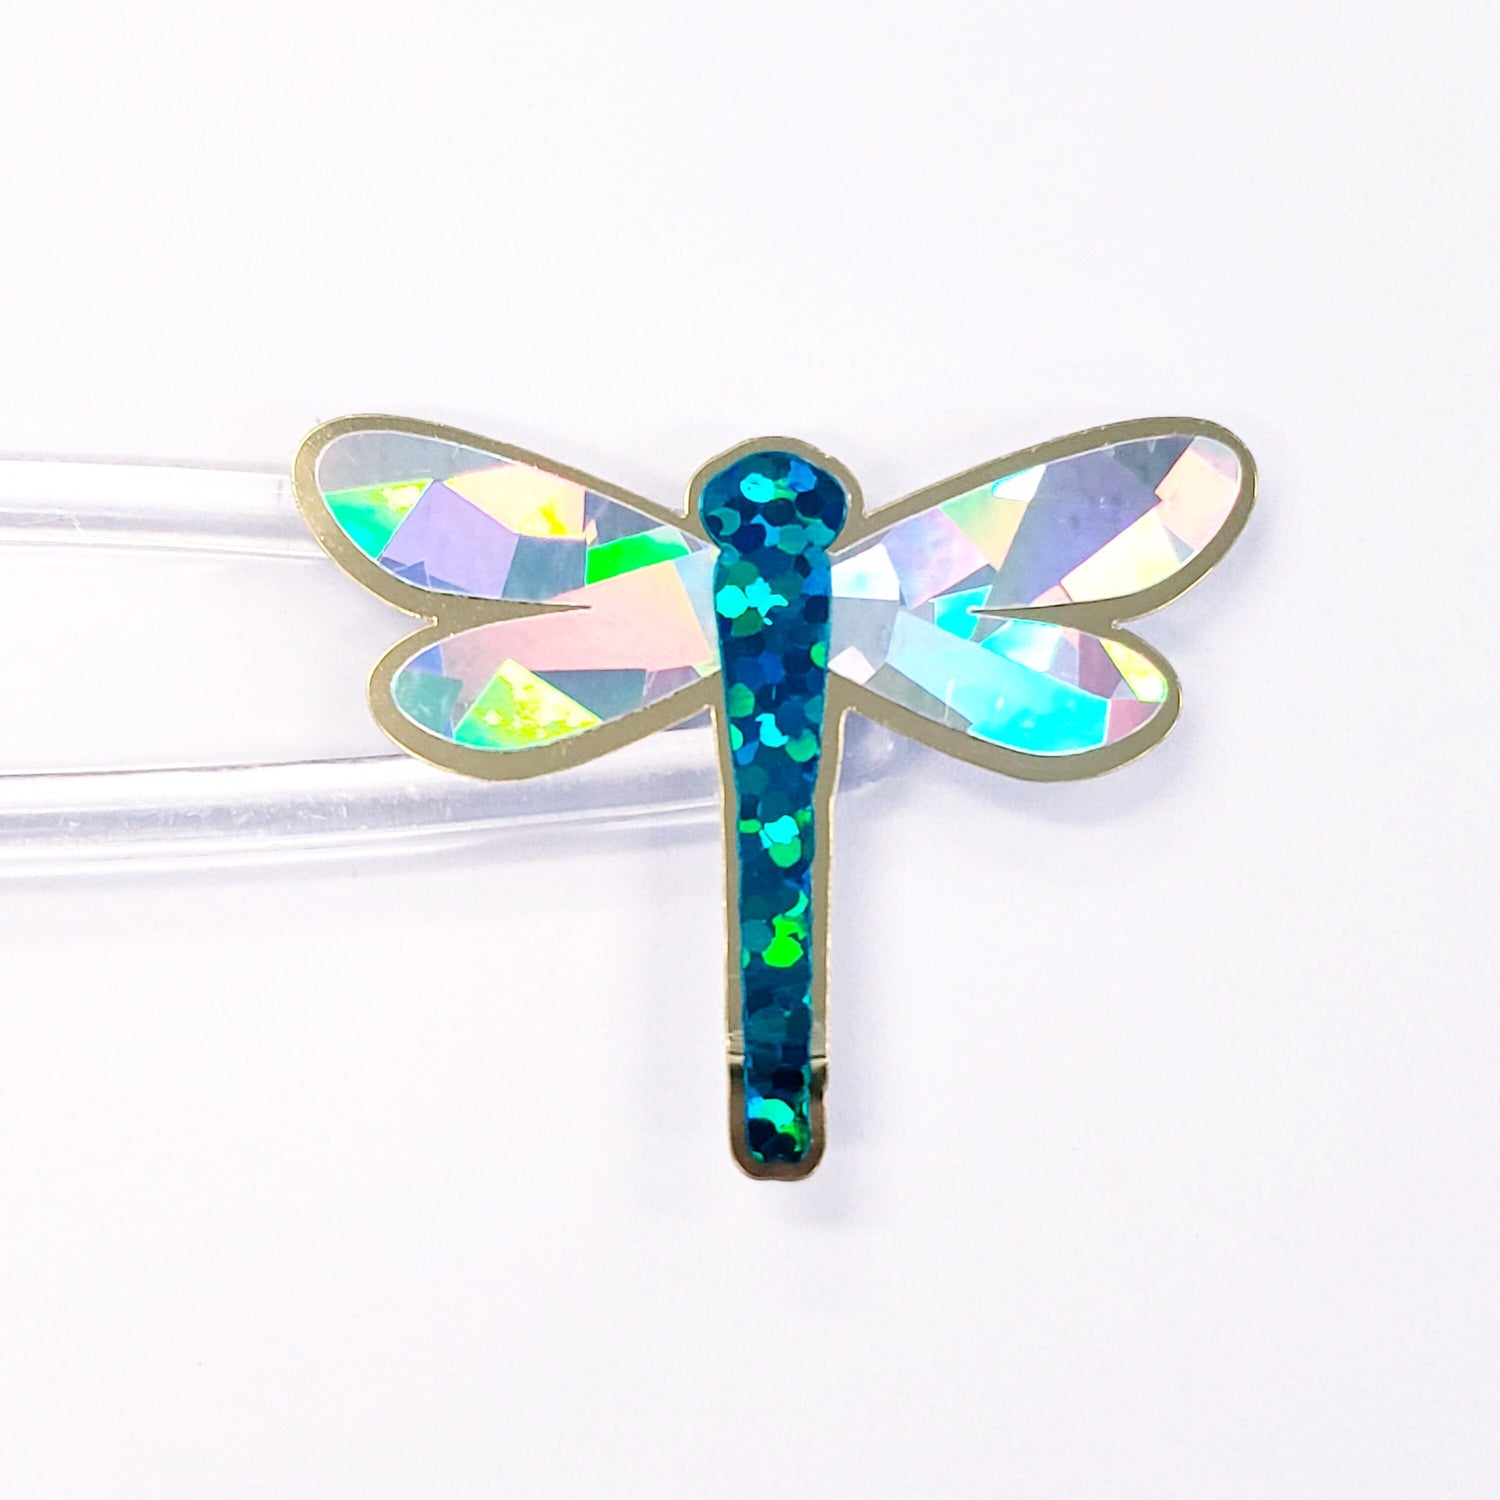 Turquoise Dragonfly Stickers, set of 4, 8 or 12 sparkly handmade glitter stickers for cards, journals and scrapbooks. Dragonfly gift